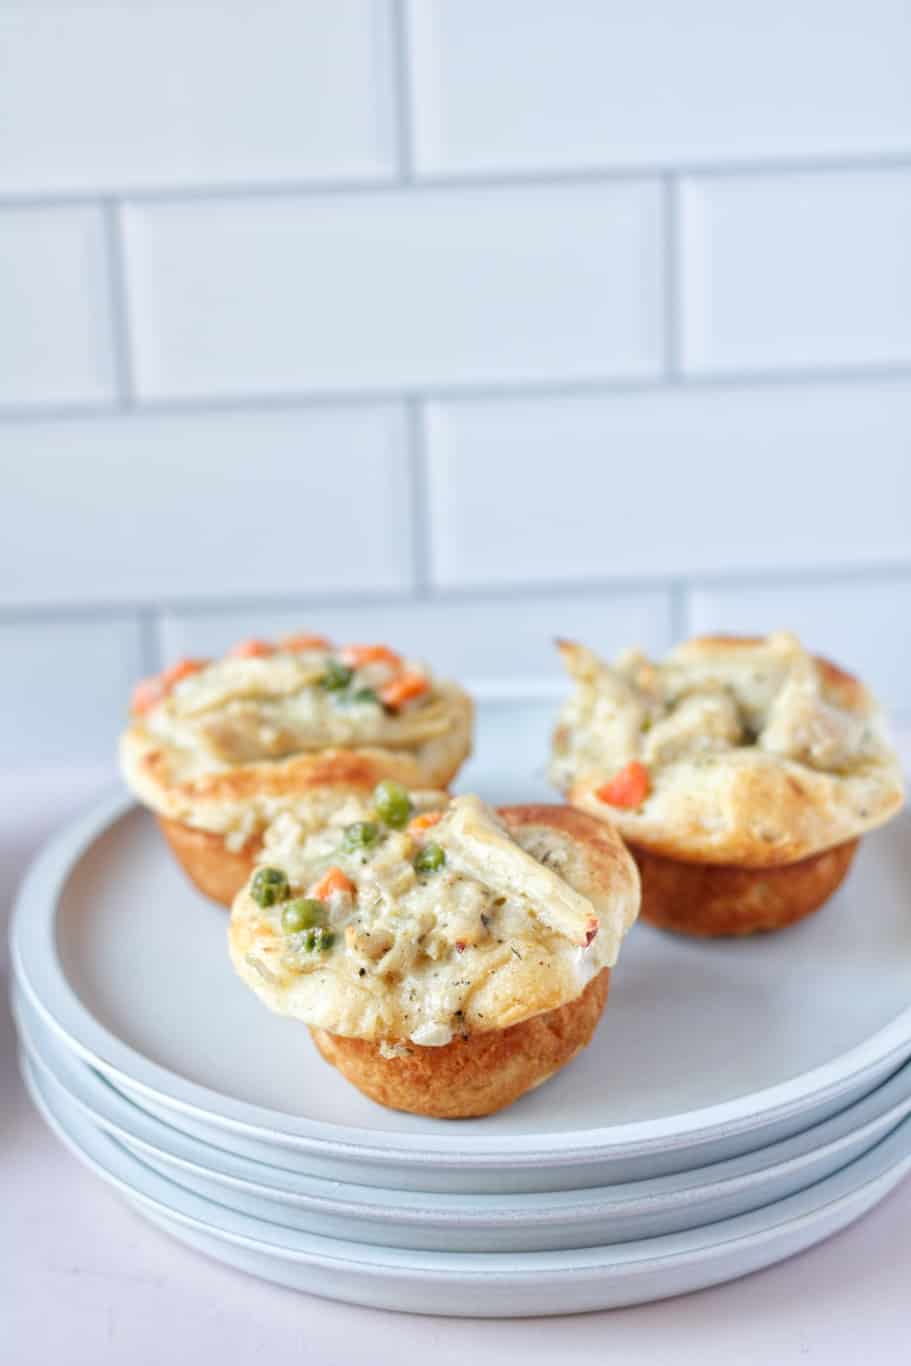 Individual flaky biscuits filled with tender chicken, a creamy filling, and crisp vegetables make an excellent make-ahead meal for your busy days.